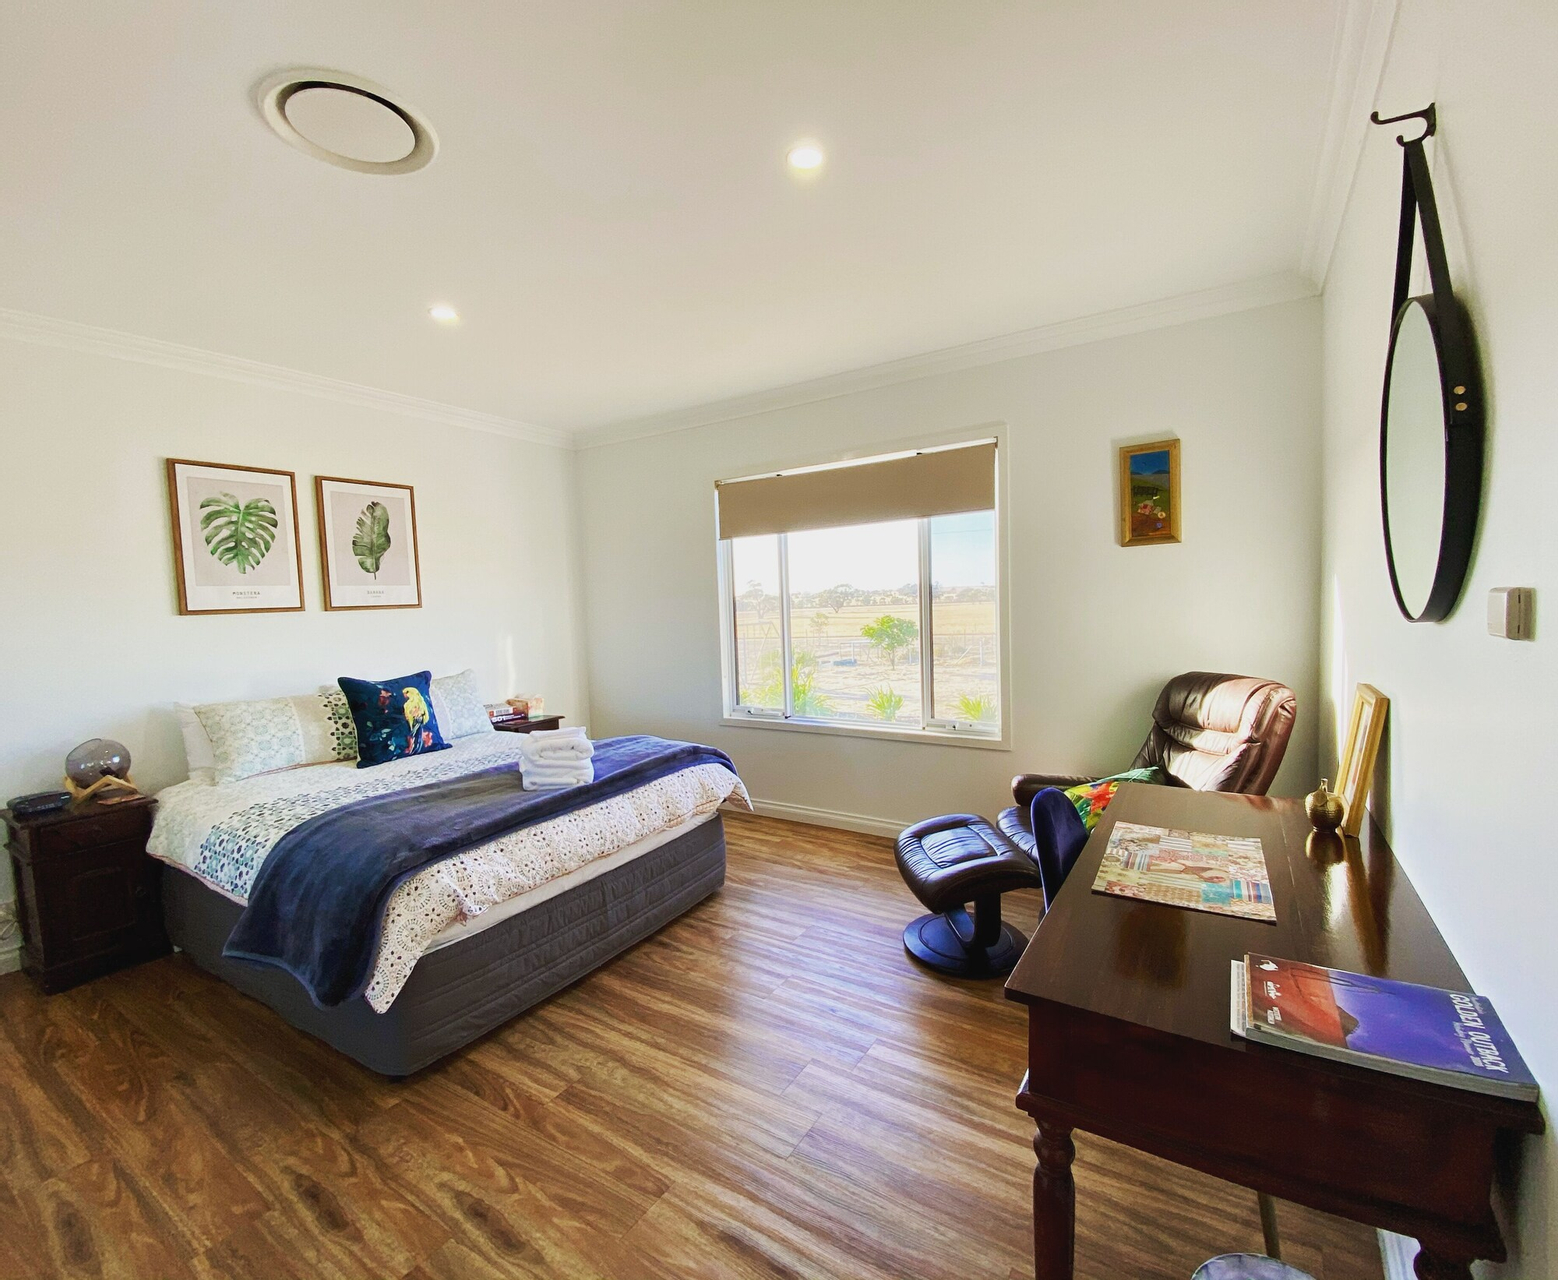 Bedroom 4, The Mains Guest House 2 Bedroom Farm Stay, Corrigin